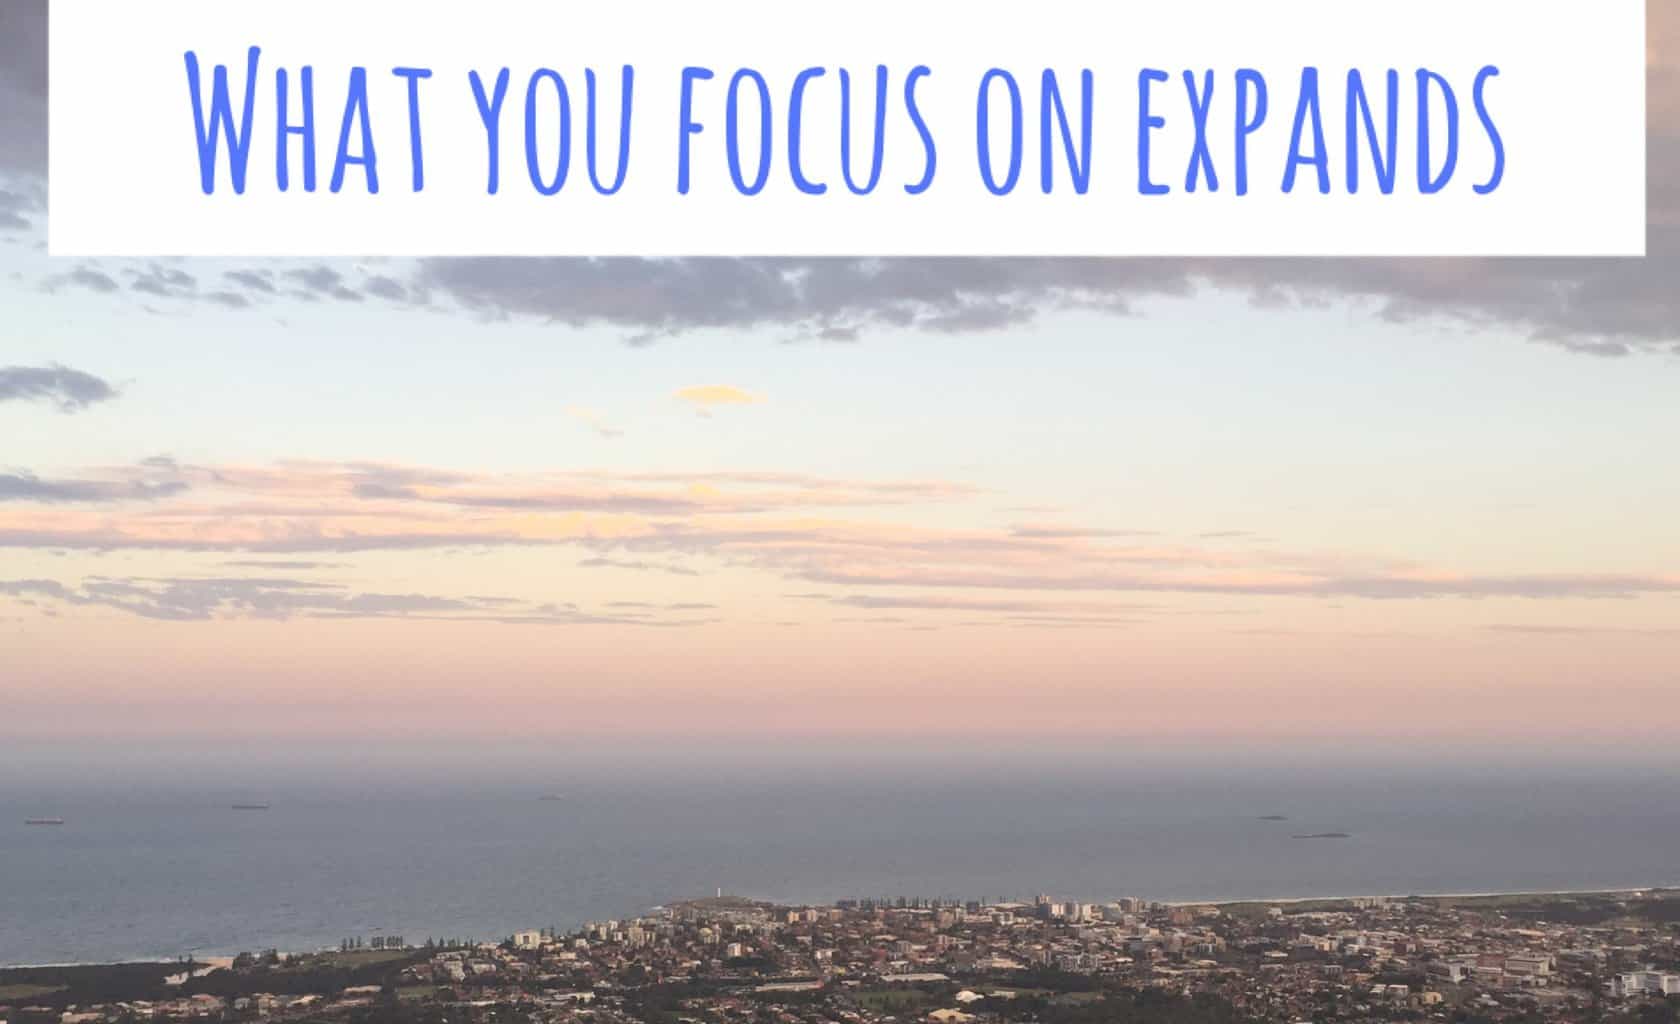 What we FOCUS on EXPANDS